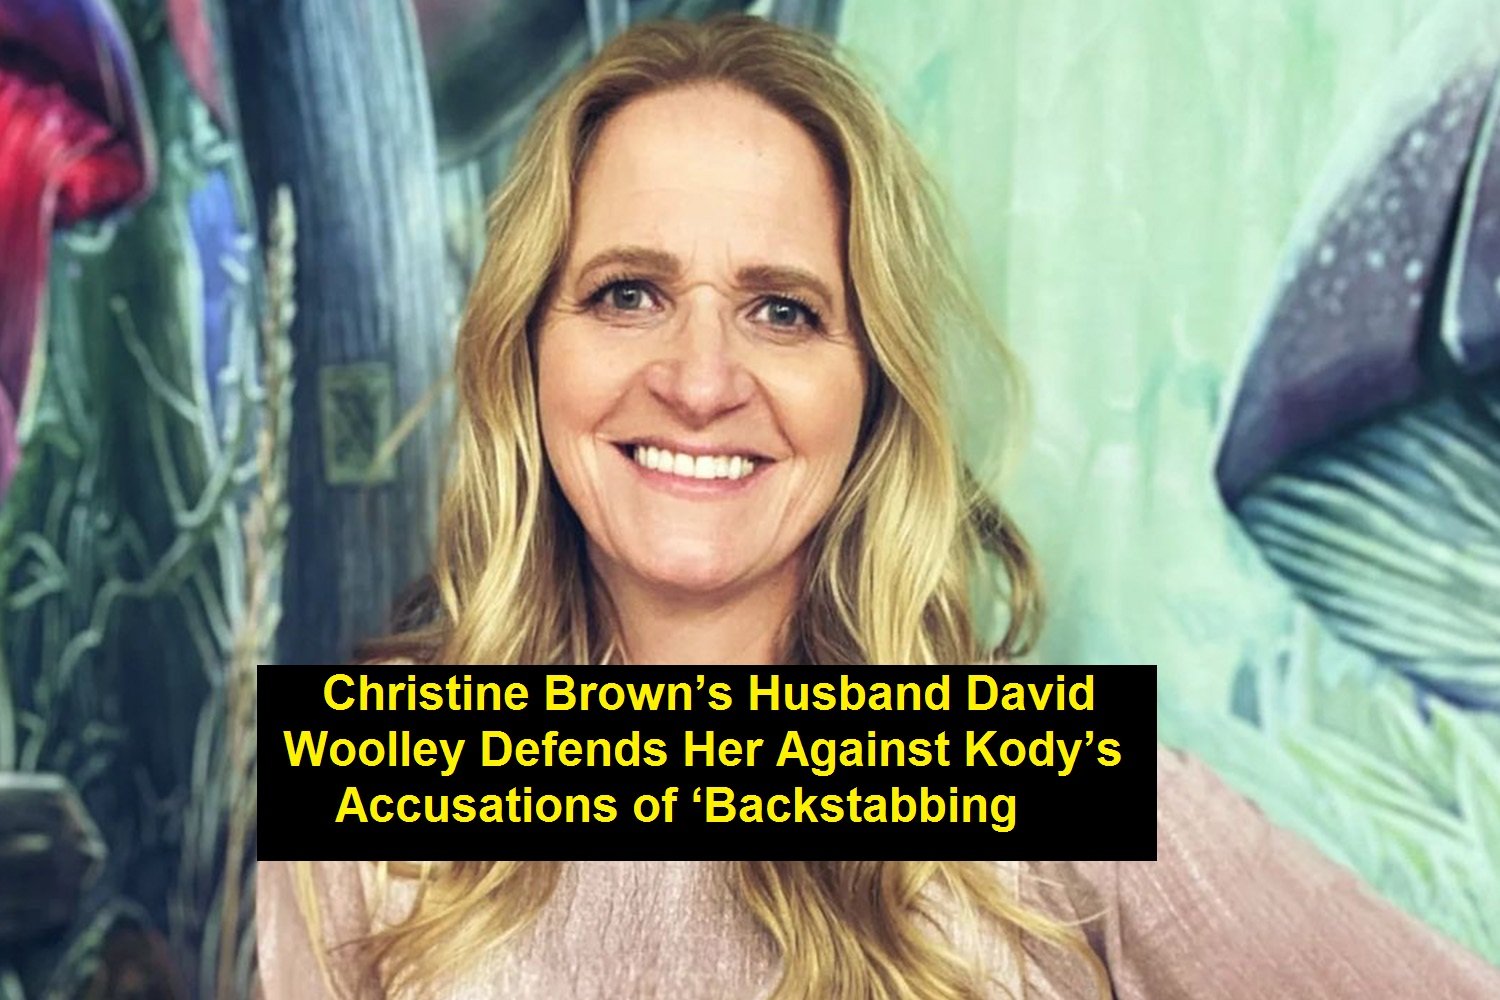 Christine Brown’s Husband David Woolley Defends Her Against Kody’s Accusations of ‘Backstabbing